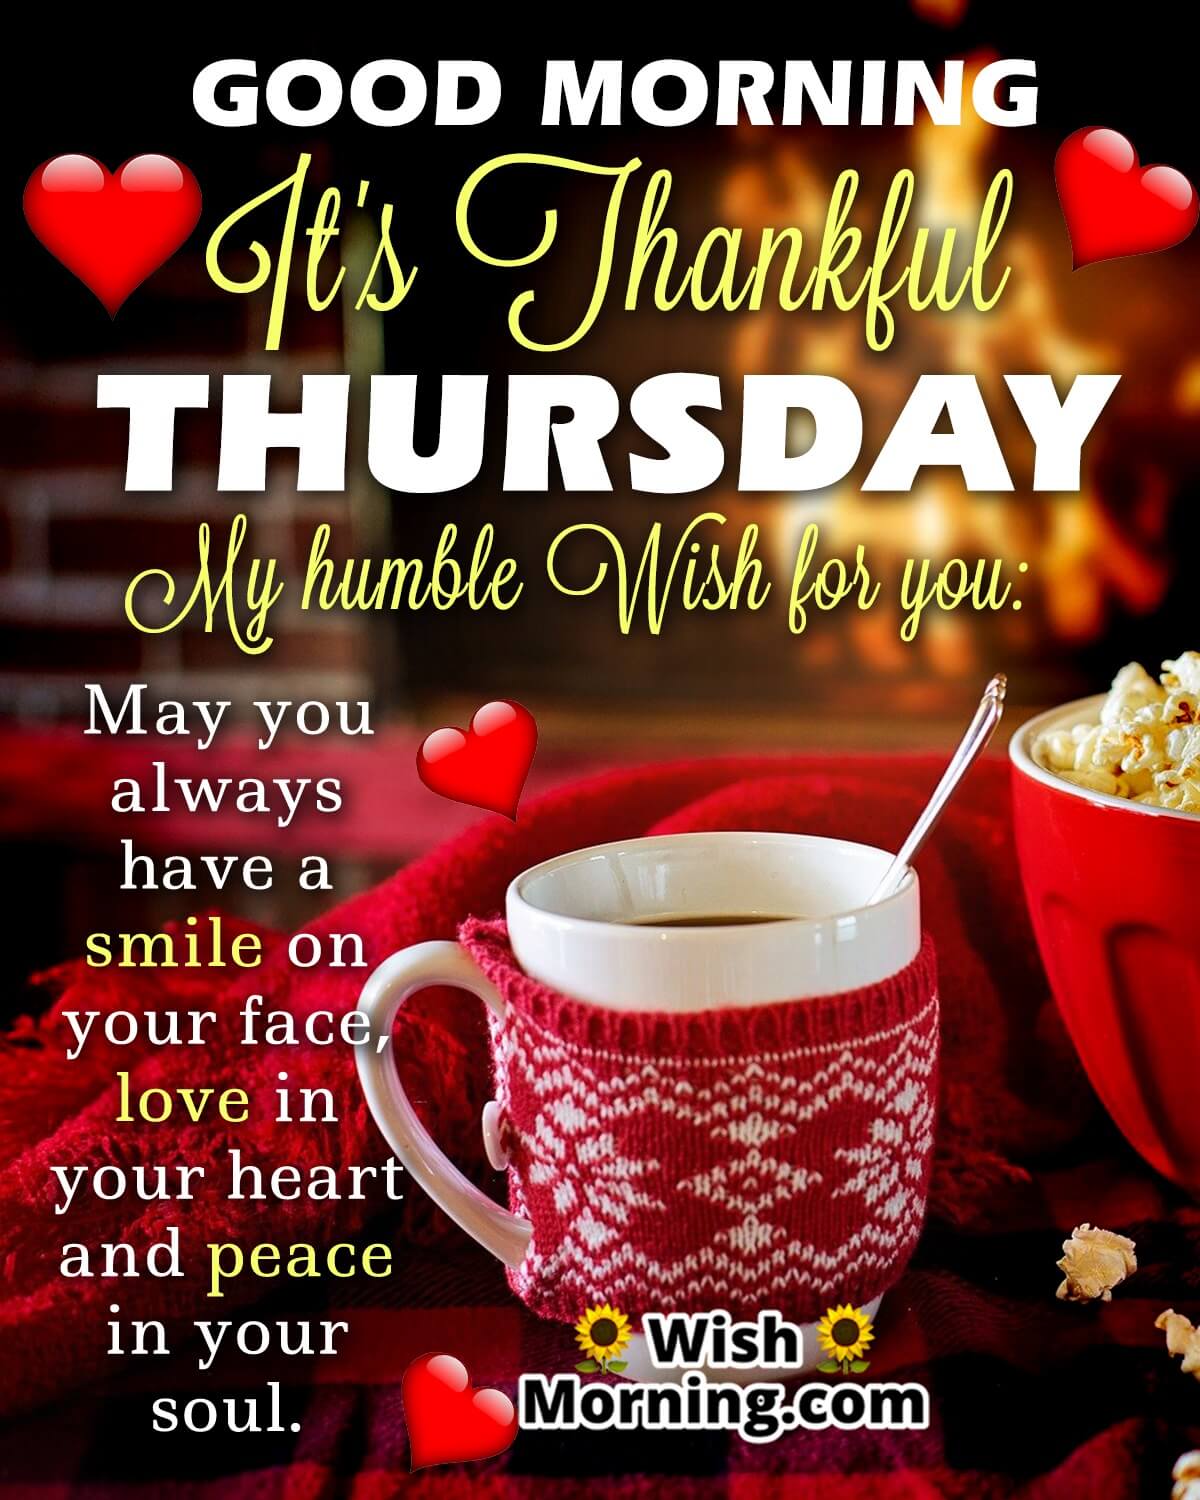 Thankful Thursday Quotes Wishes - Wish Morning